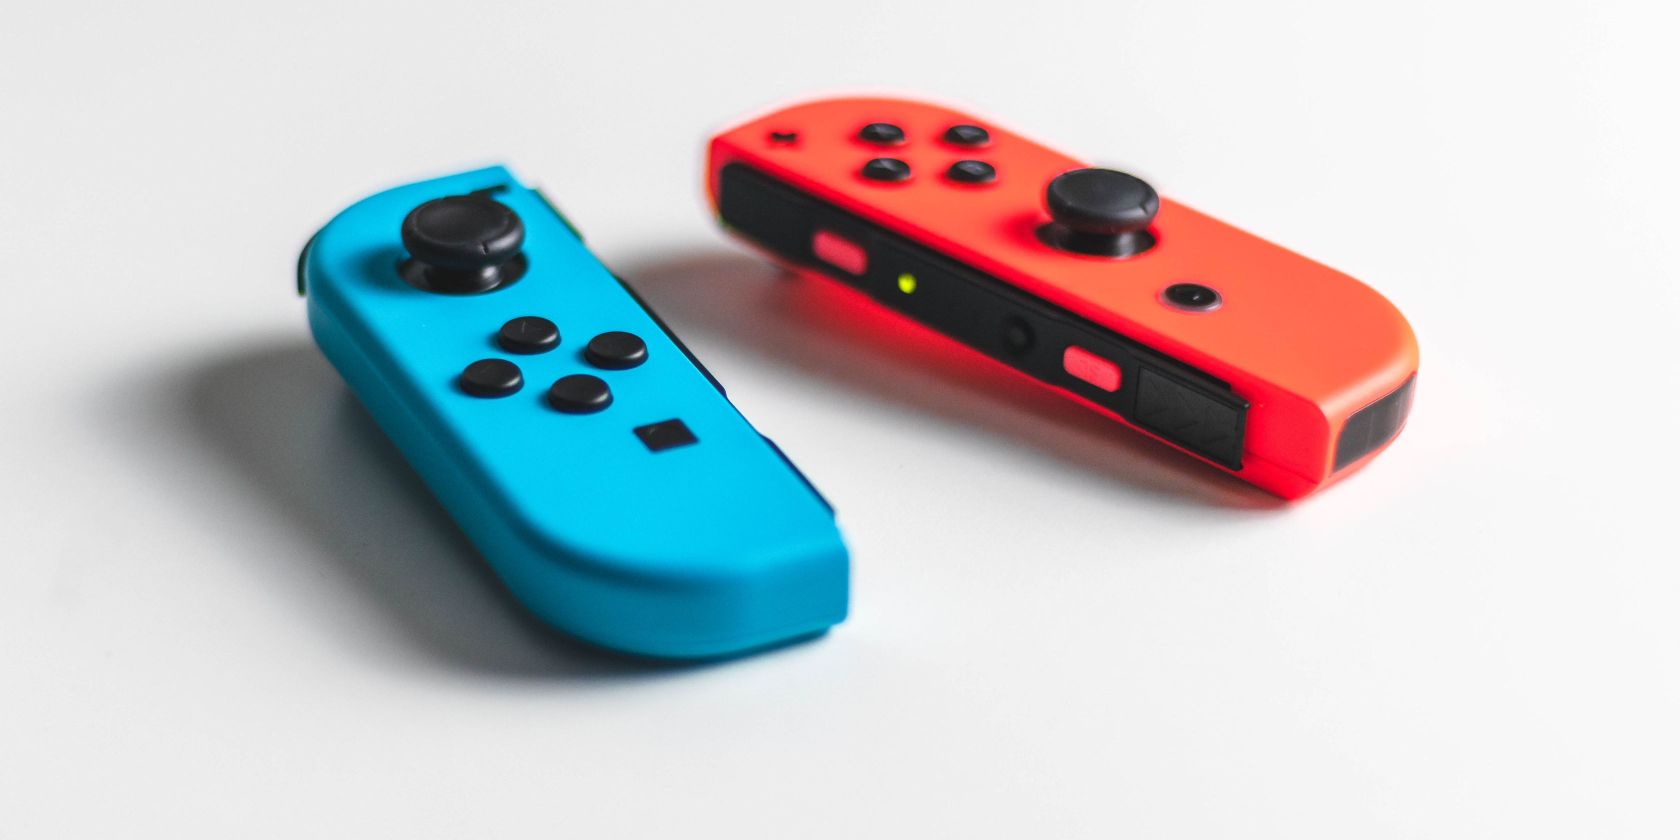 How to Connect Your Nintendo Switch Joy-Cons to an iPhone